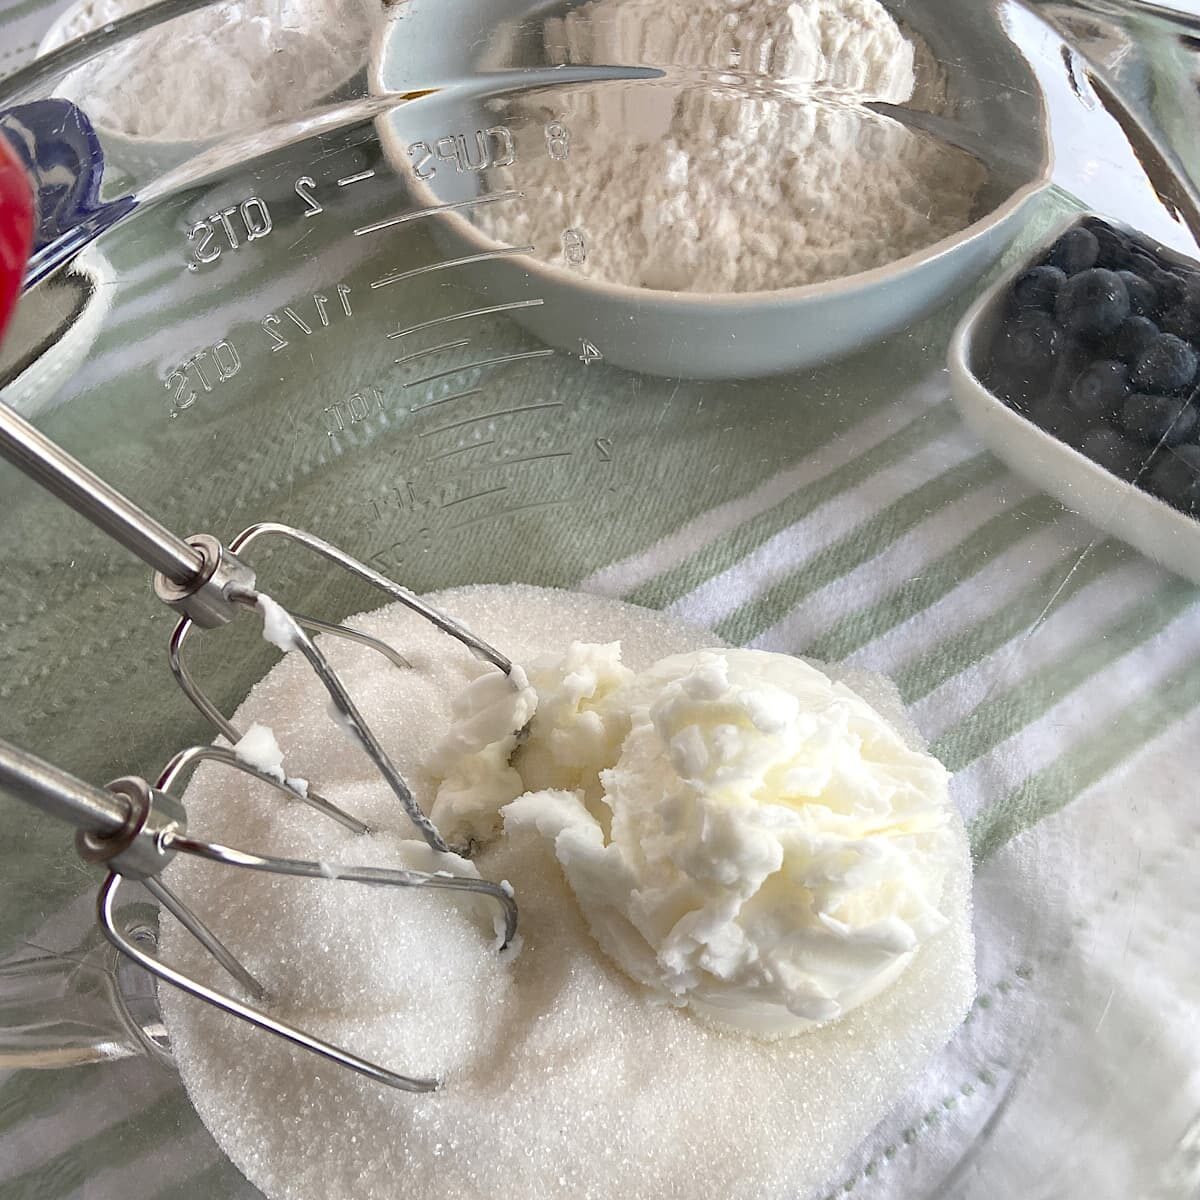 cream shortening and sugar in a bowl with hand mixer.